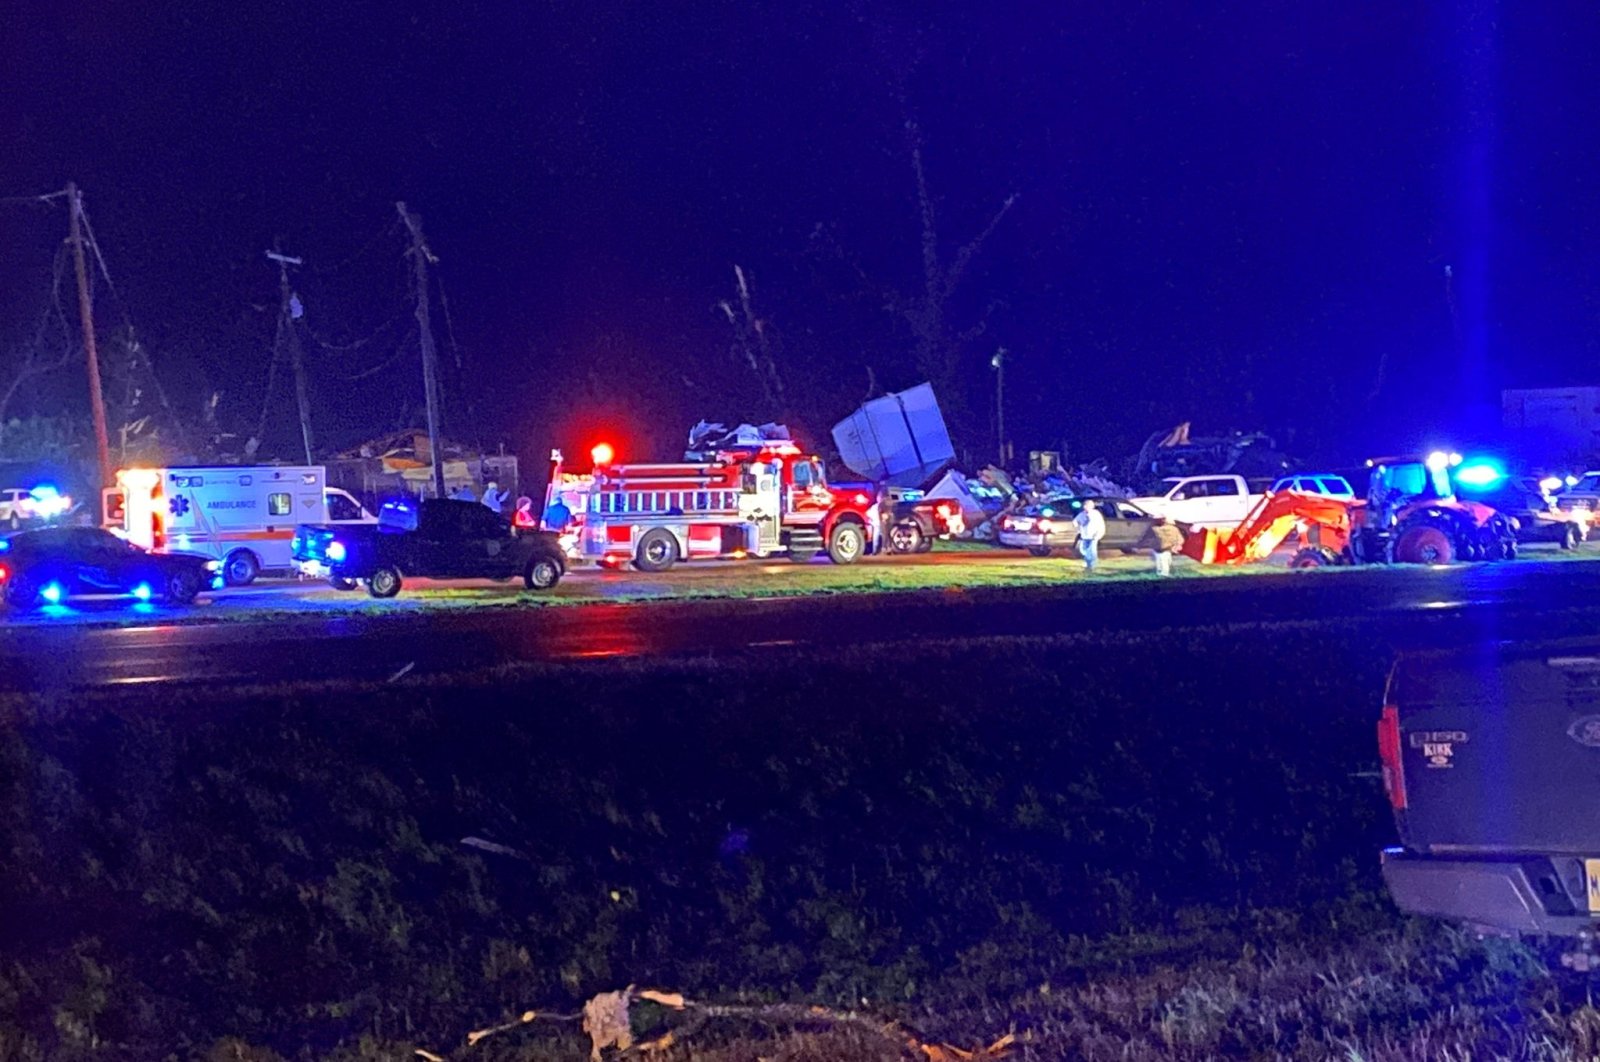 A general view shows damaged cars and structures, while emergency crews work at the scene, following a tornado in Silver City, Mississippi, U.S., March 24, 2023. (Reuters Photo)